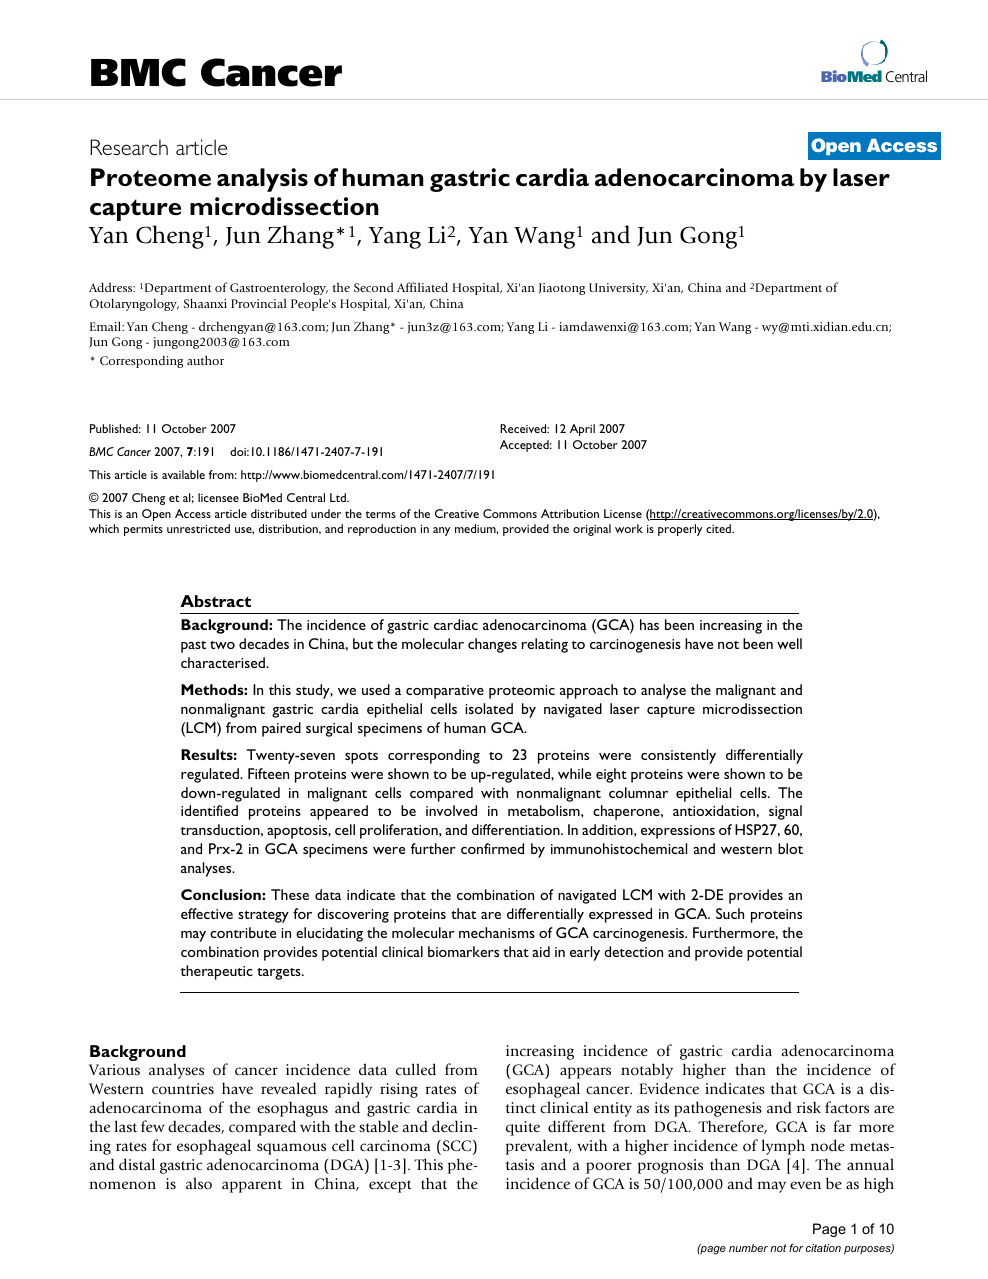 Proteome Analysis Of Human Gastric Cardia Adenocarcinoma By Laser